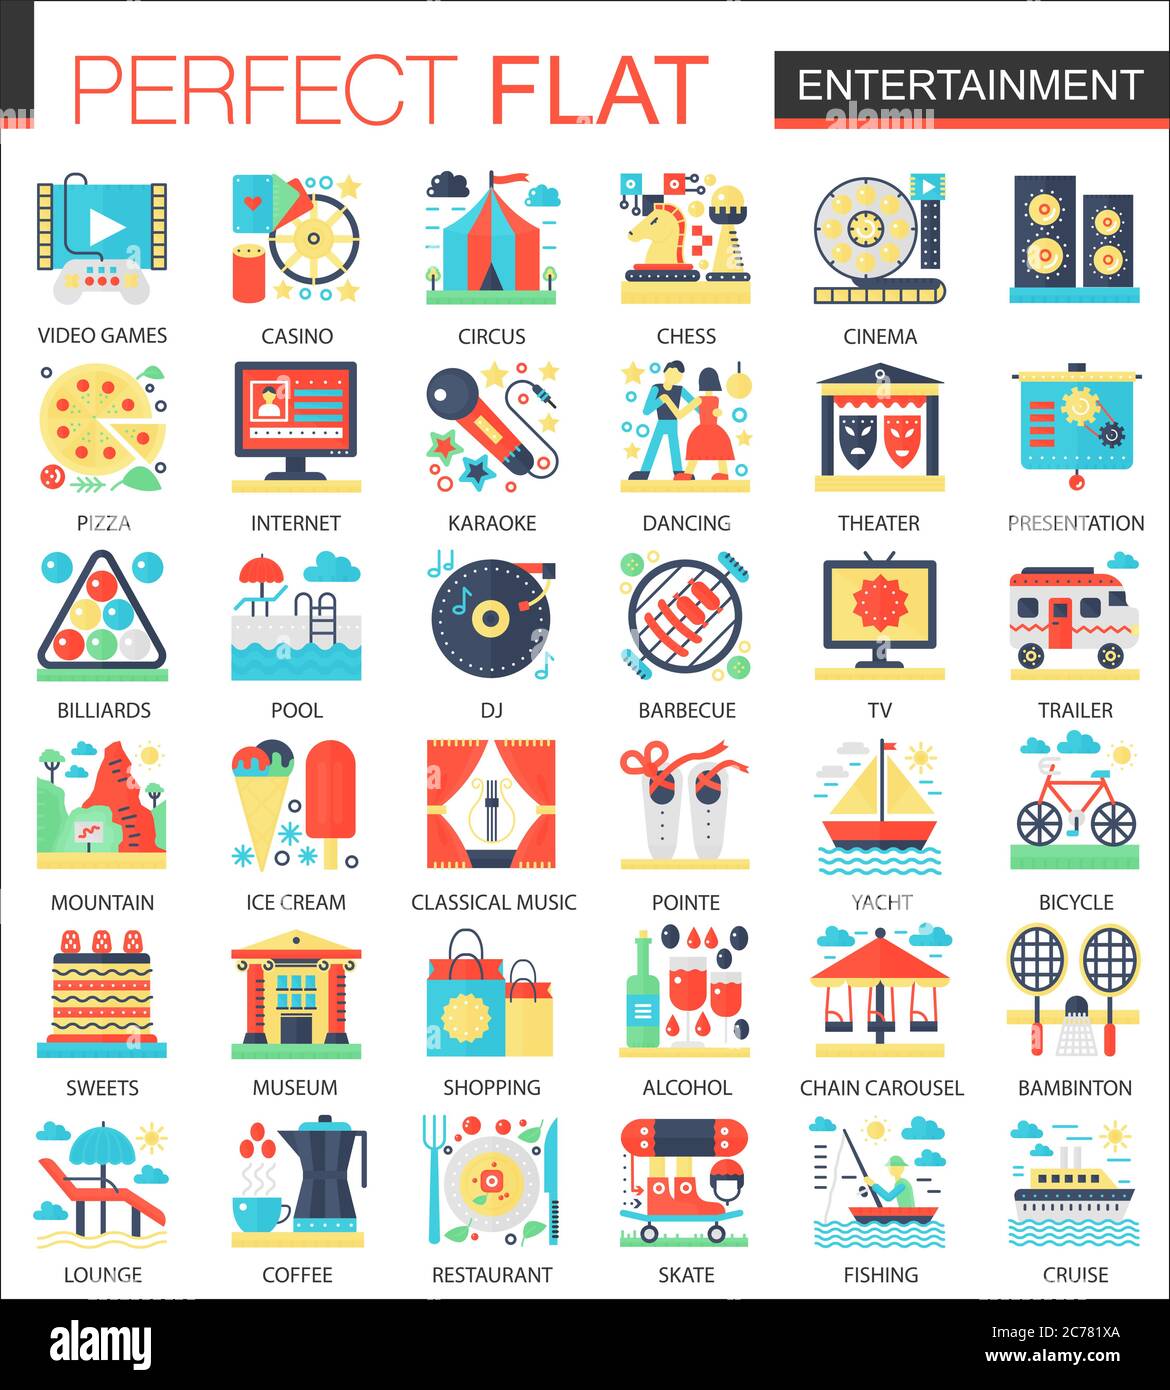 Entertainment vector complex flat icon concept symbols for web infographic design isolated Stock Vector